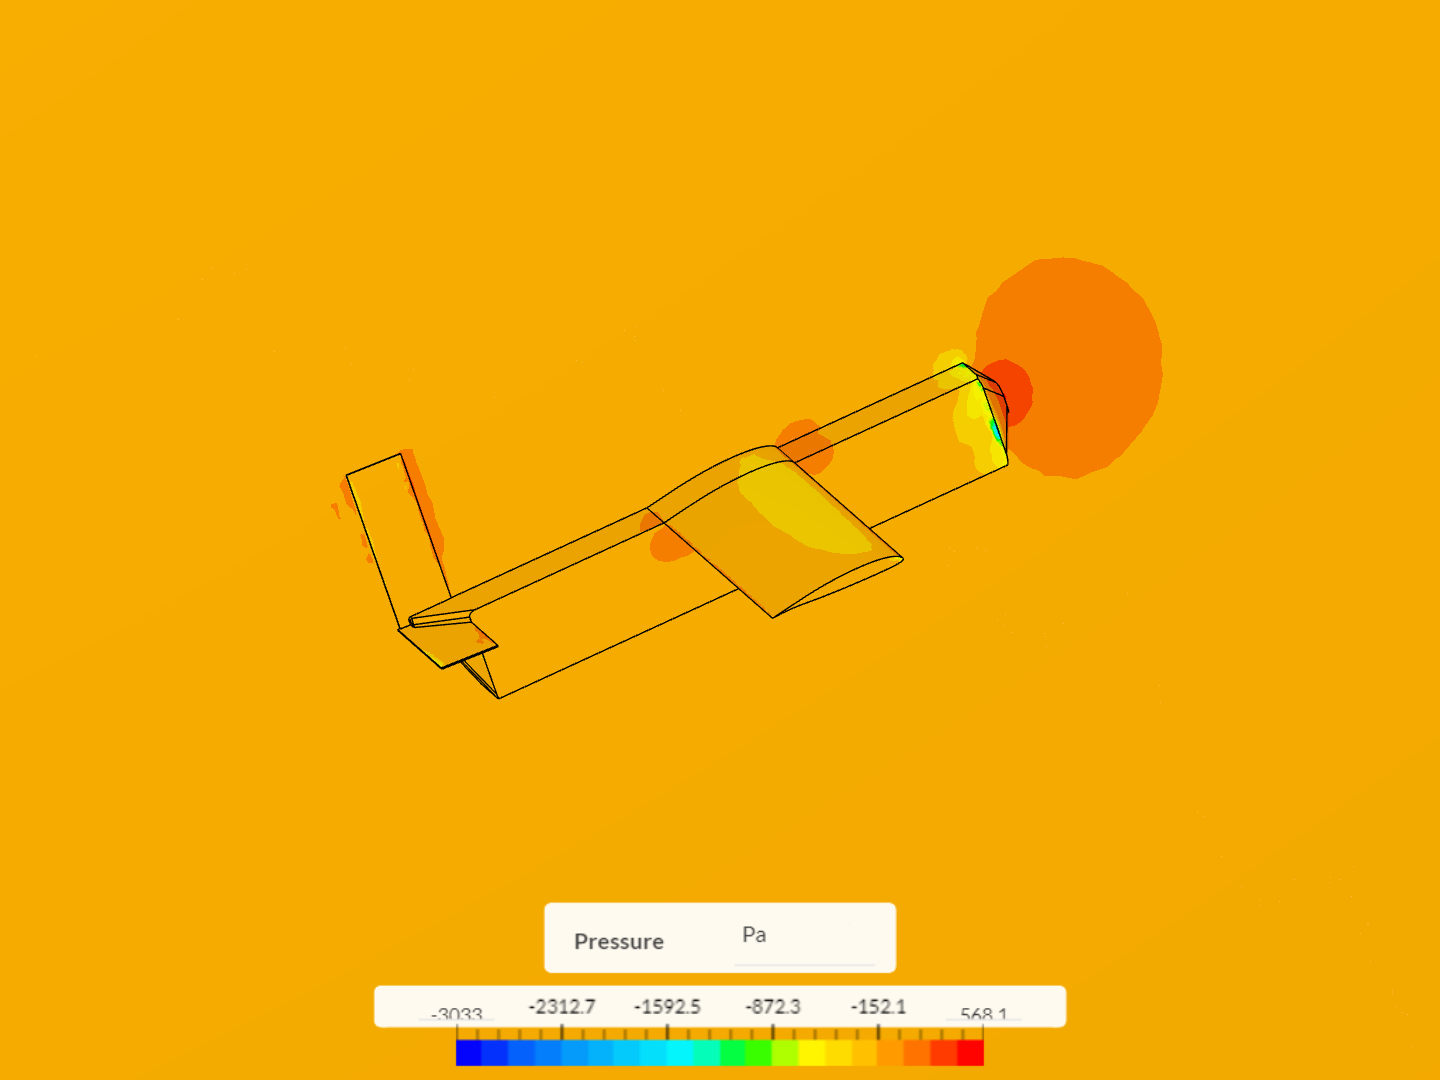 AIAA 2021 airplane - CFD analysis - test 1 image